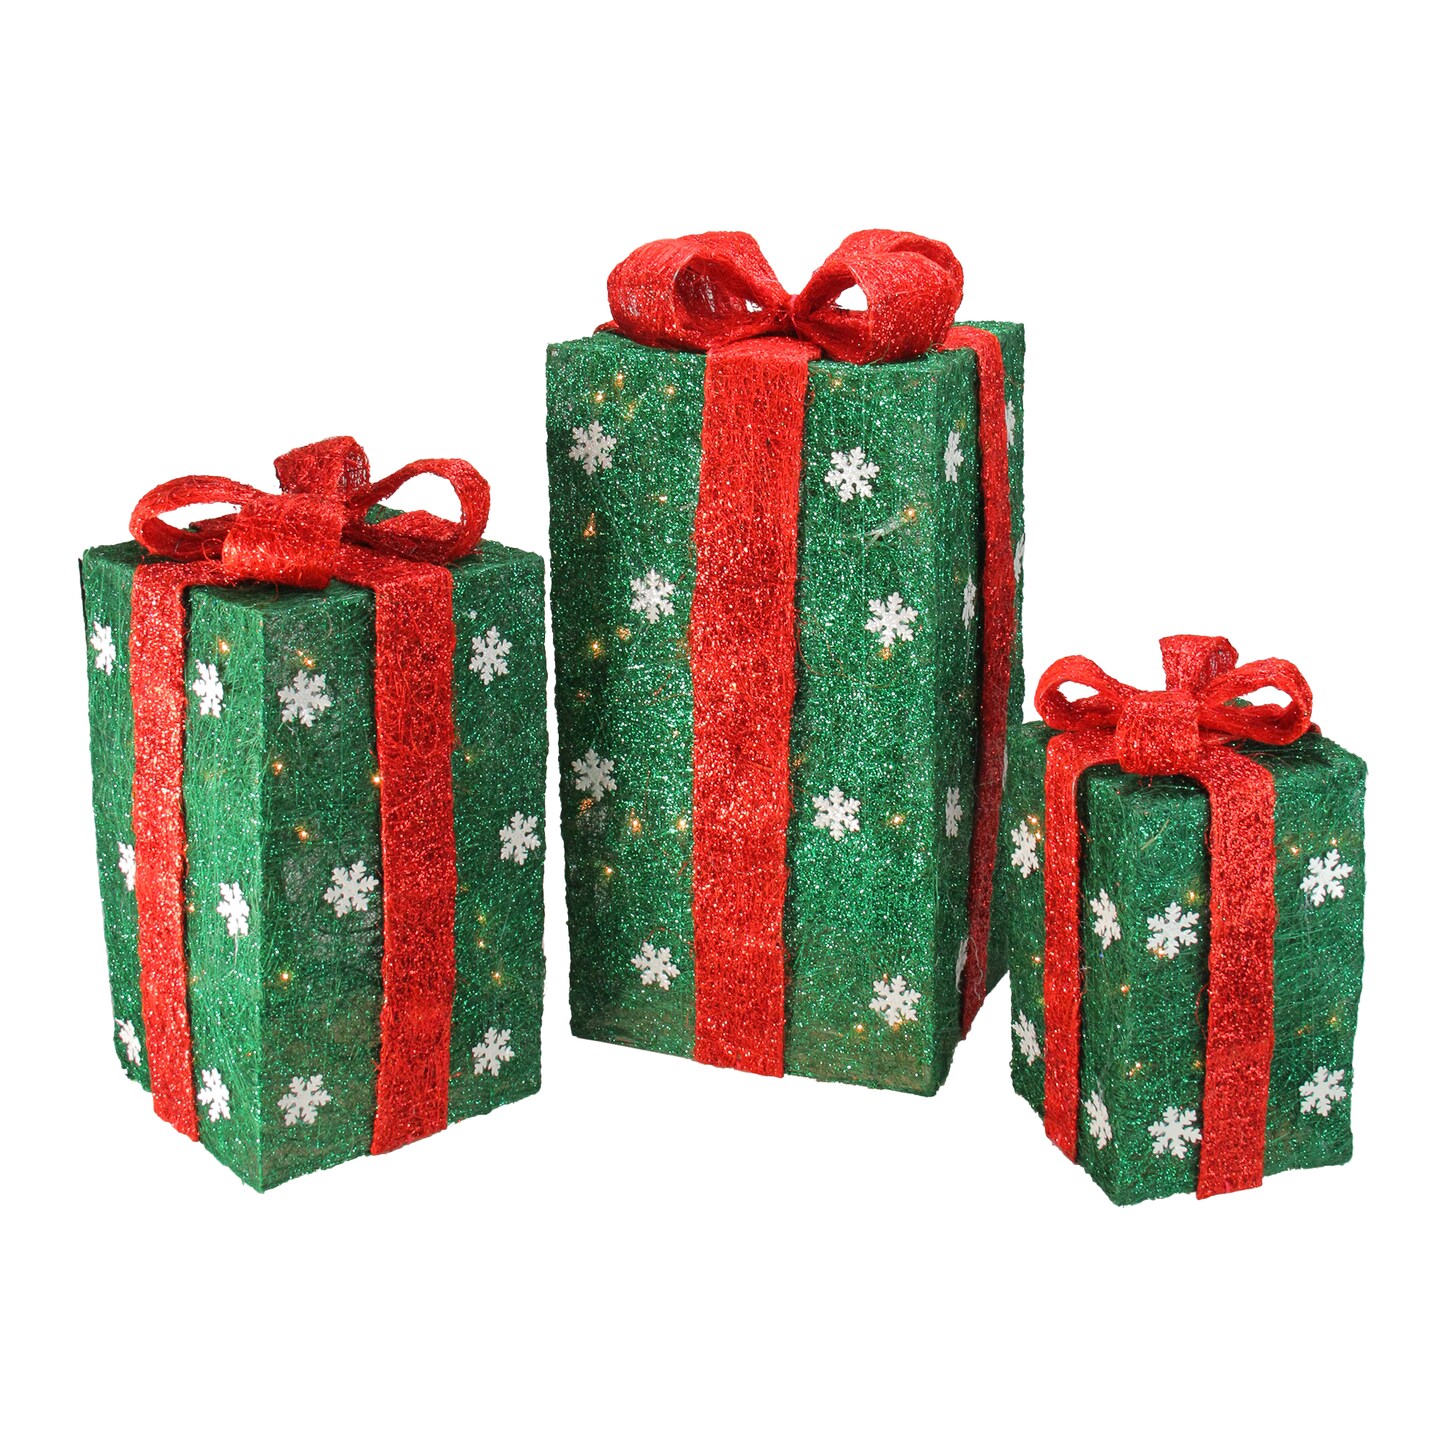 Northlight Set Of 3 Lighted Tall Green Gift Boxes With Red Bows